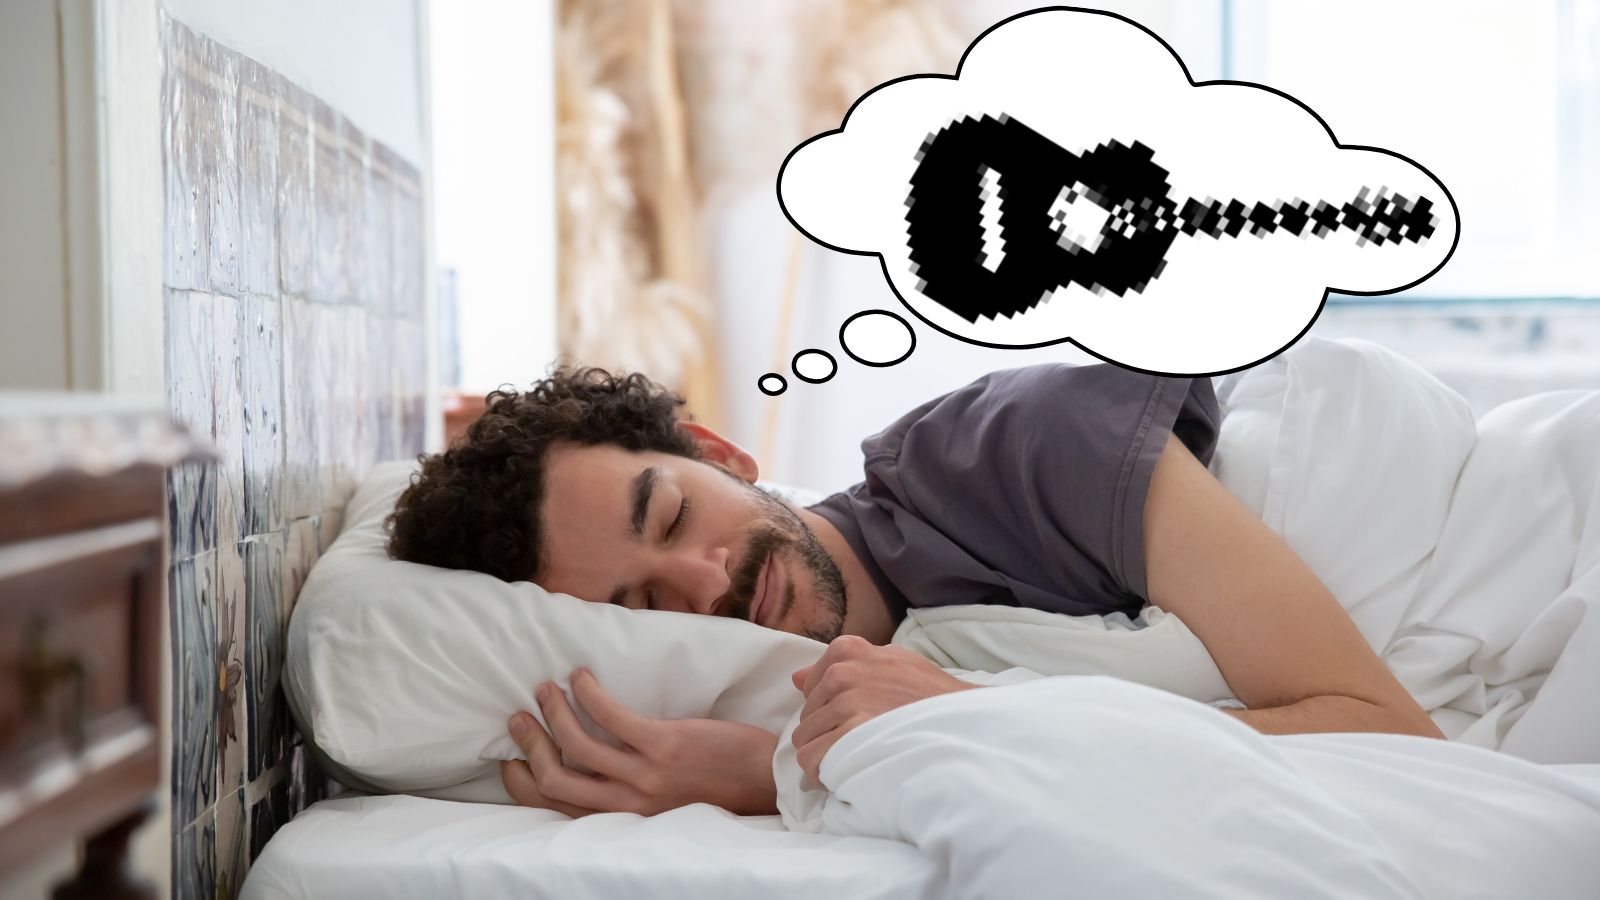 rest improves guitar playing skills, you need breaks between practice